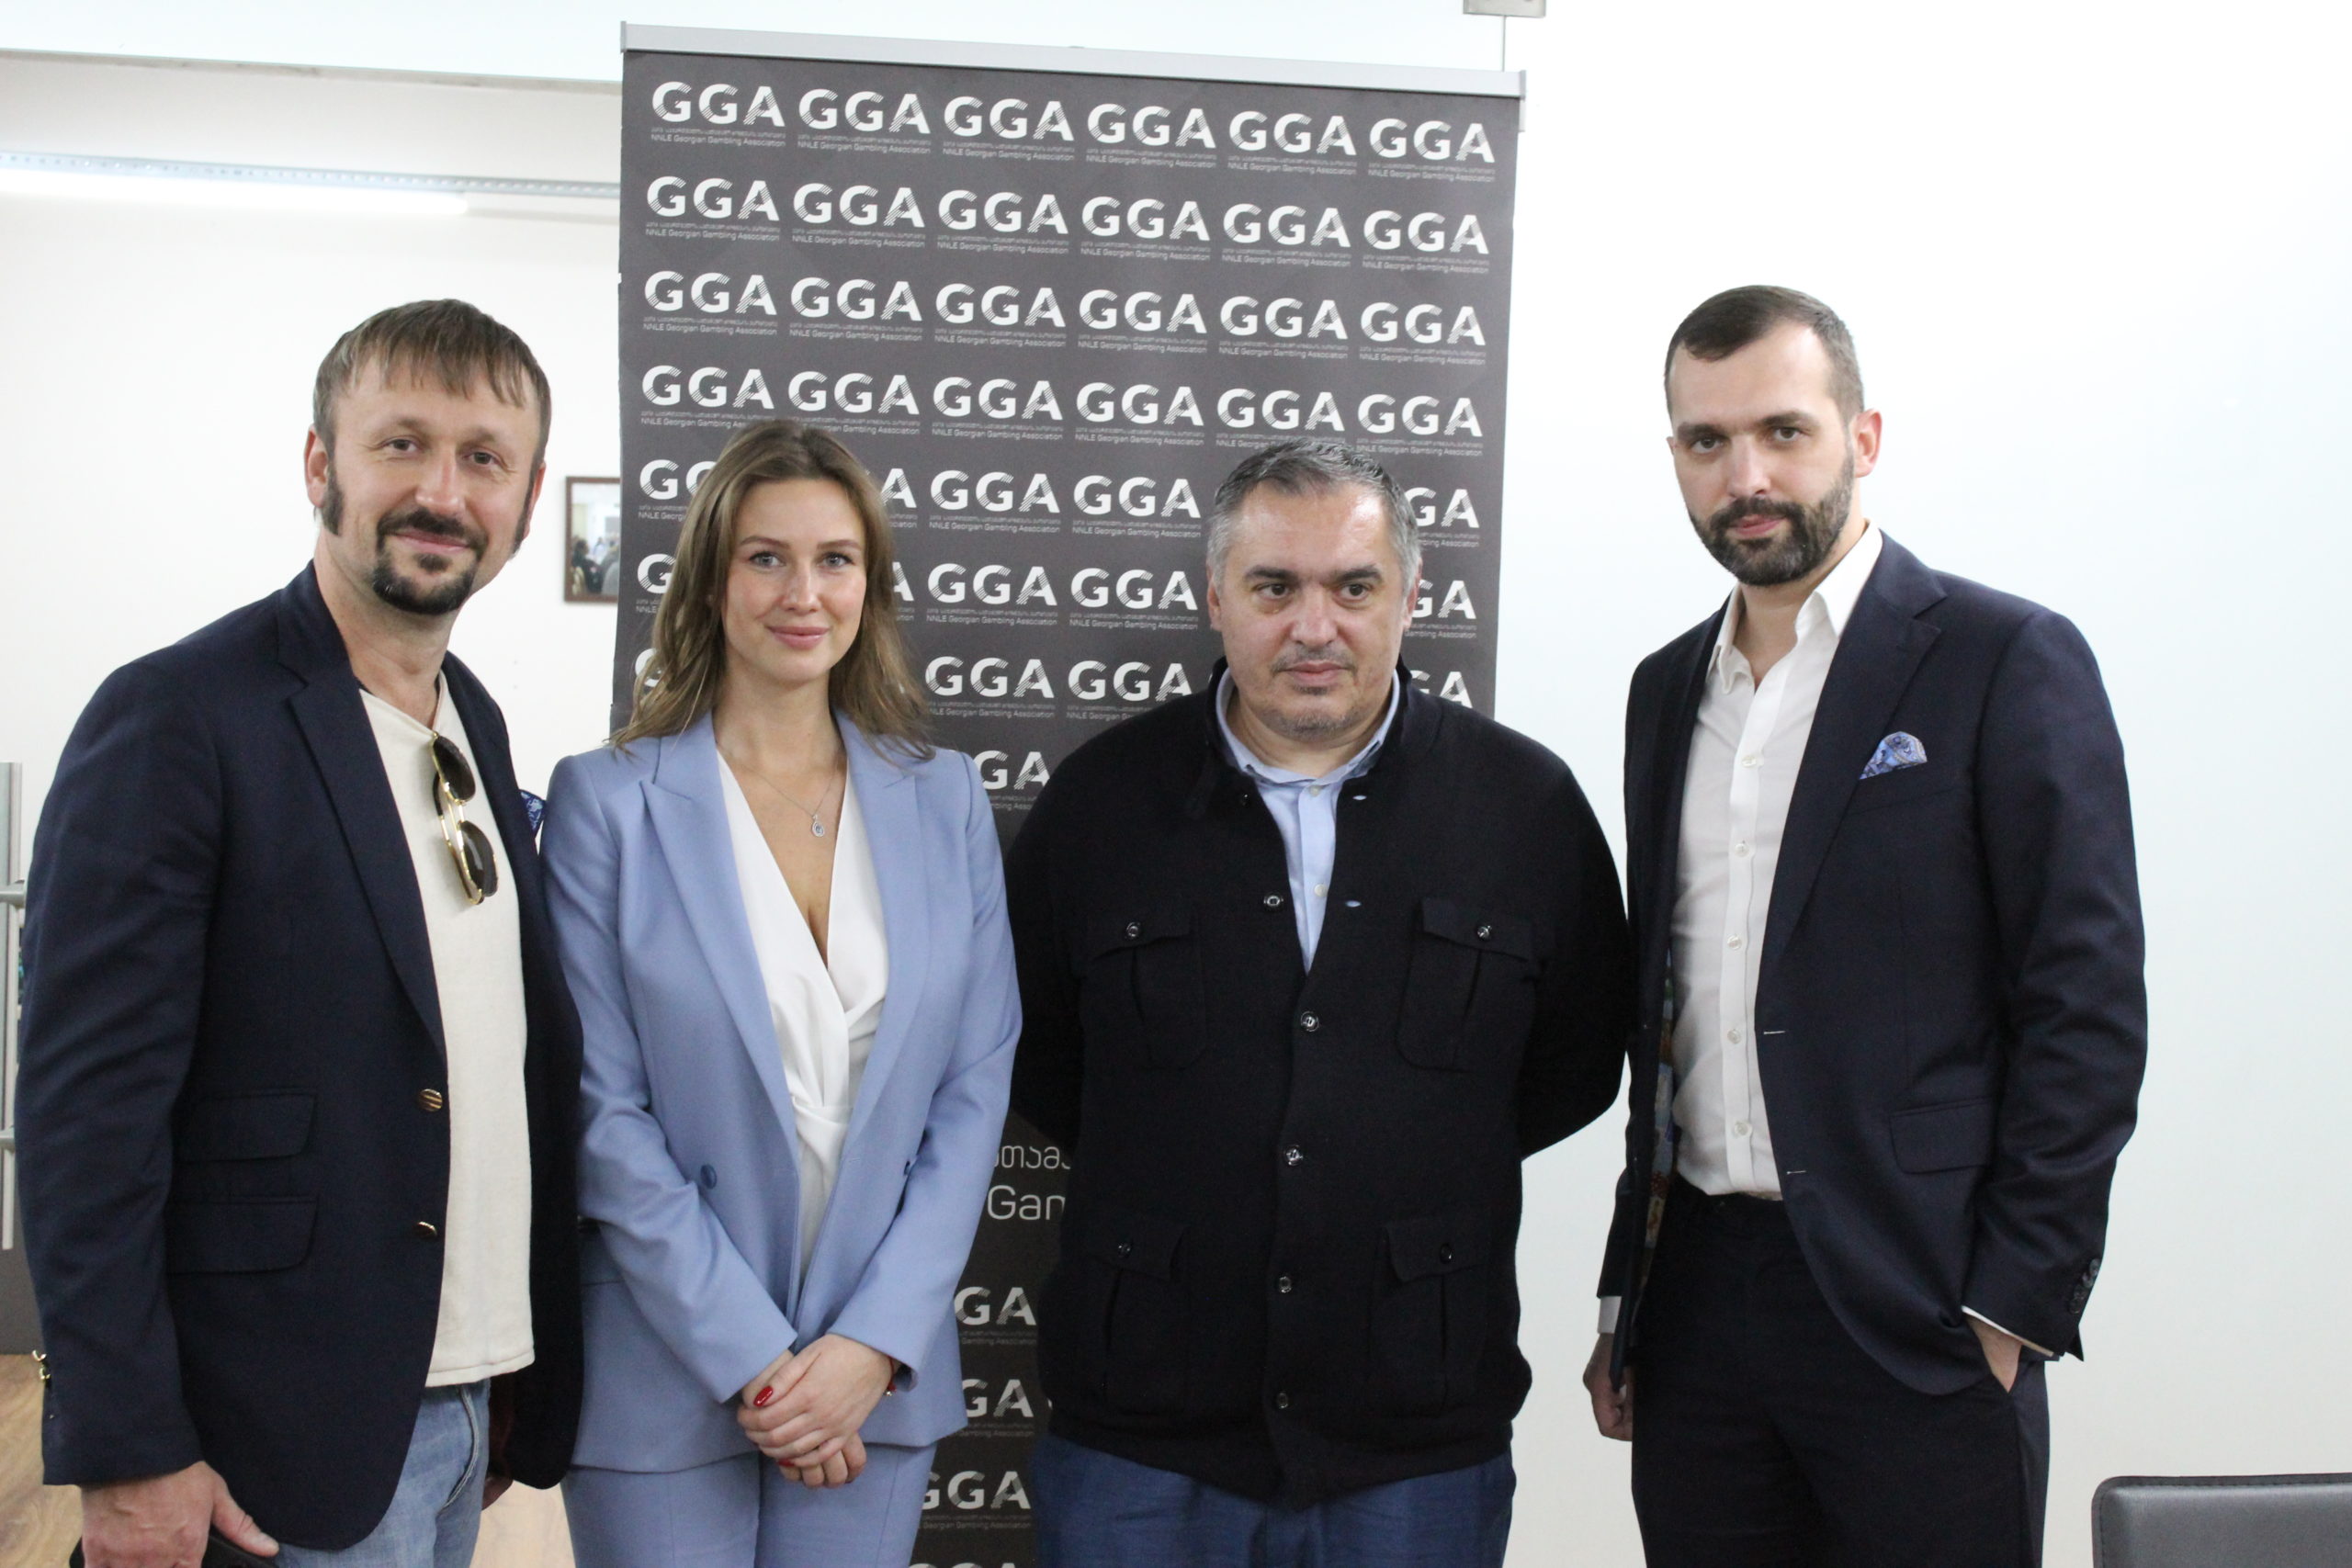 A Memorandum of Cooperation was signed between the Gambling Business Association and the Gaming Council Ukraine